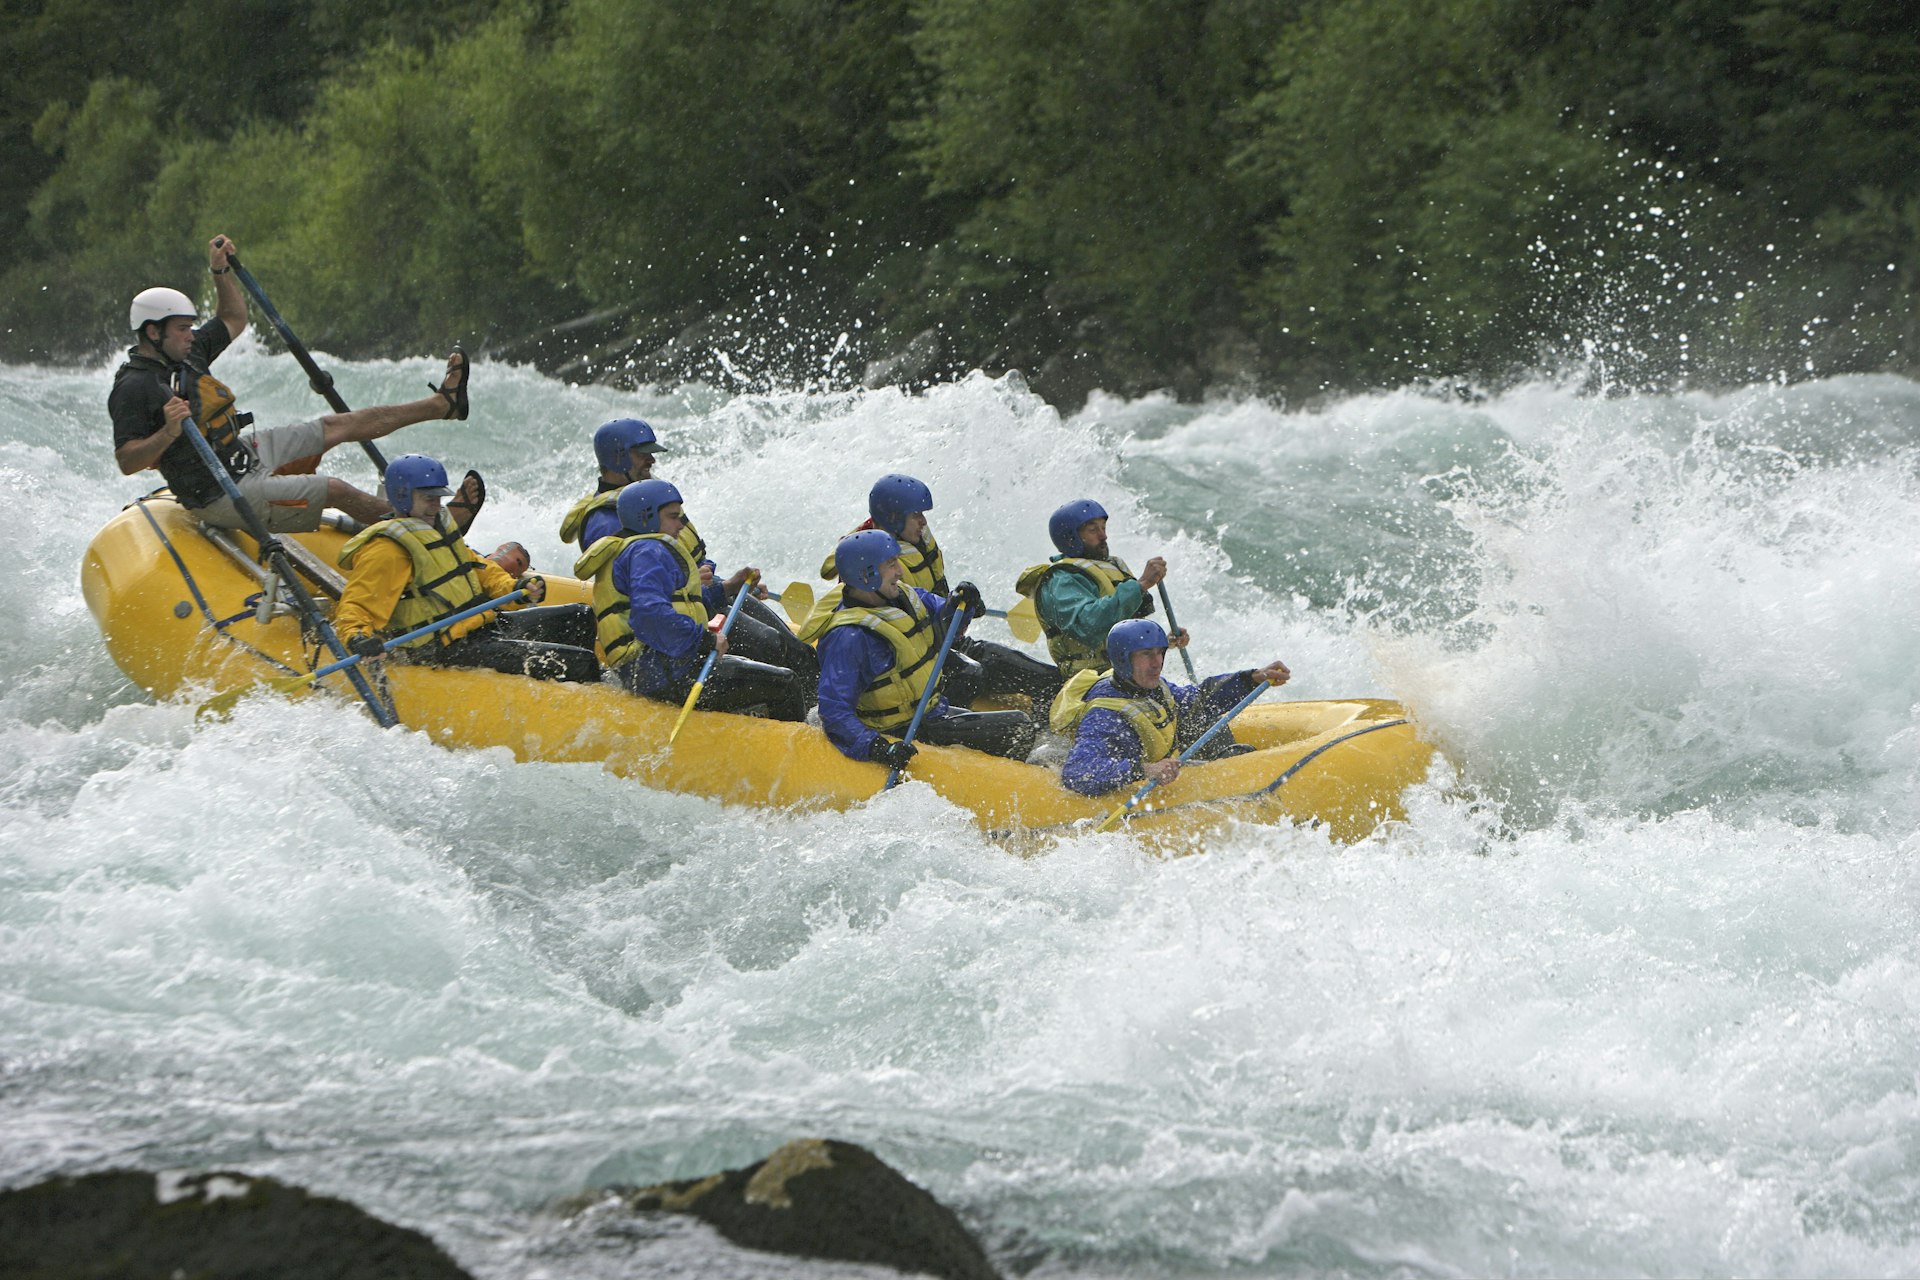 A group of eight people in blue wetsuits, helmets and yellow lifejackets white-water raft along the Futaleufu River with the leader at the back almost being chucked from his seat